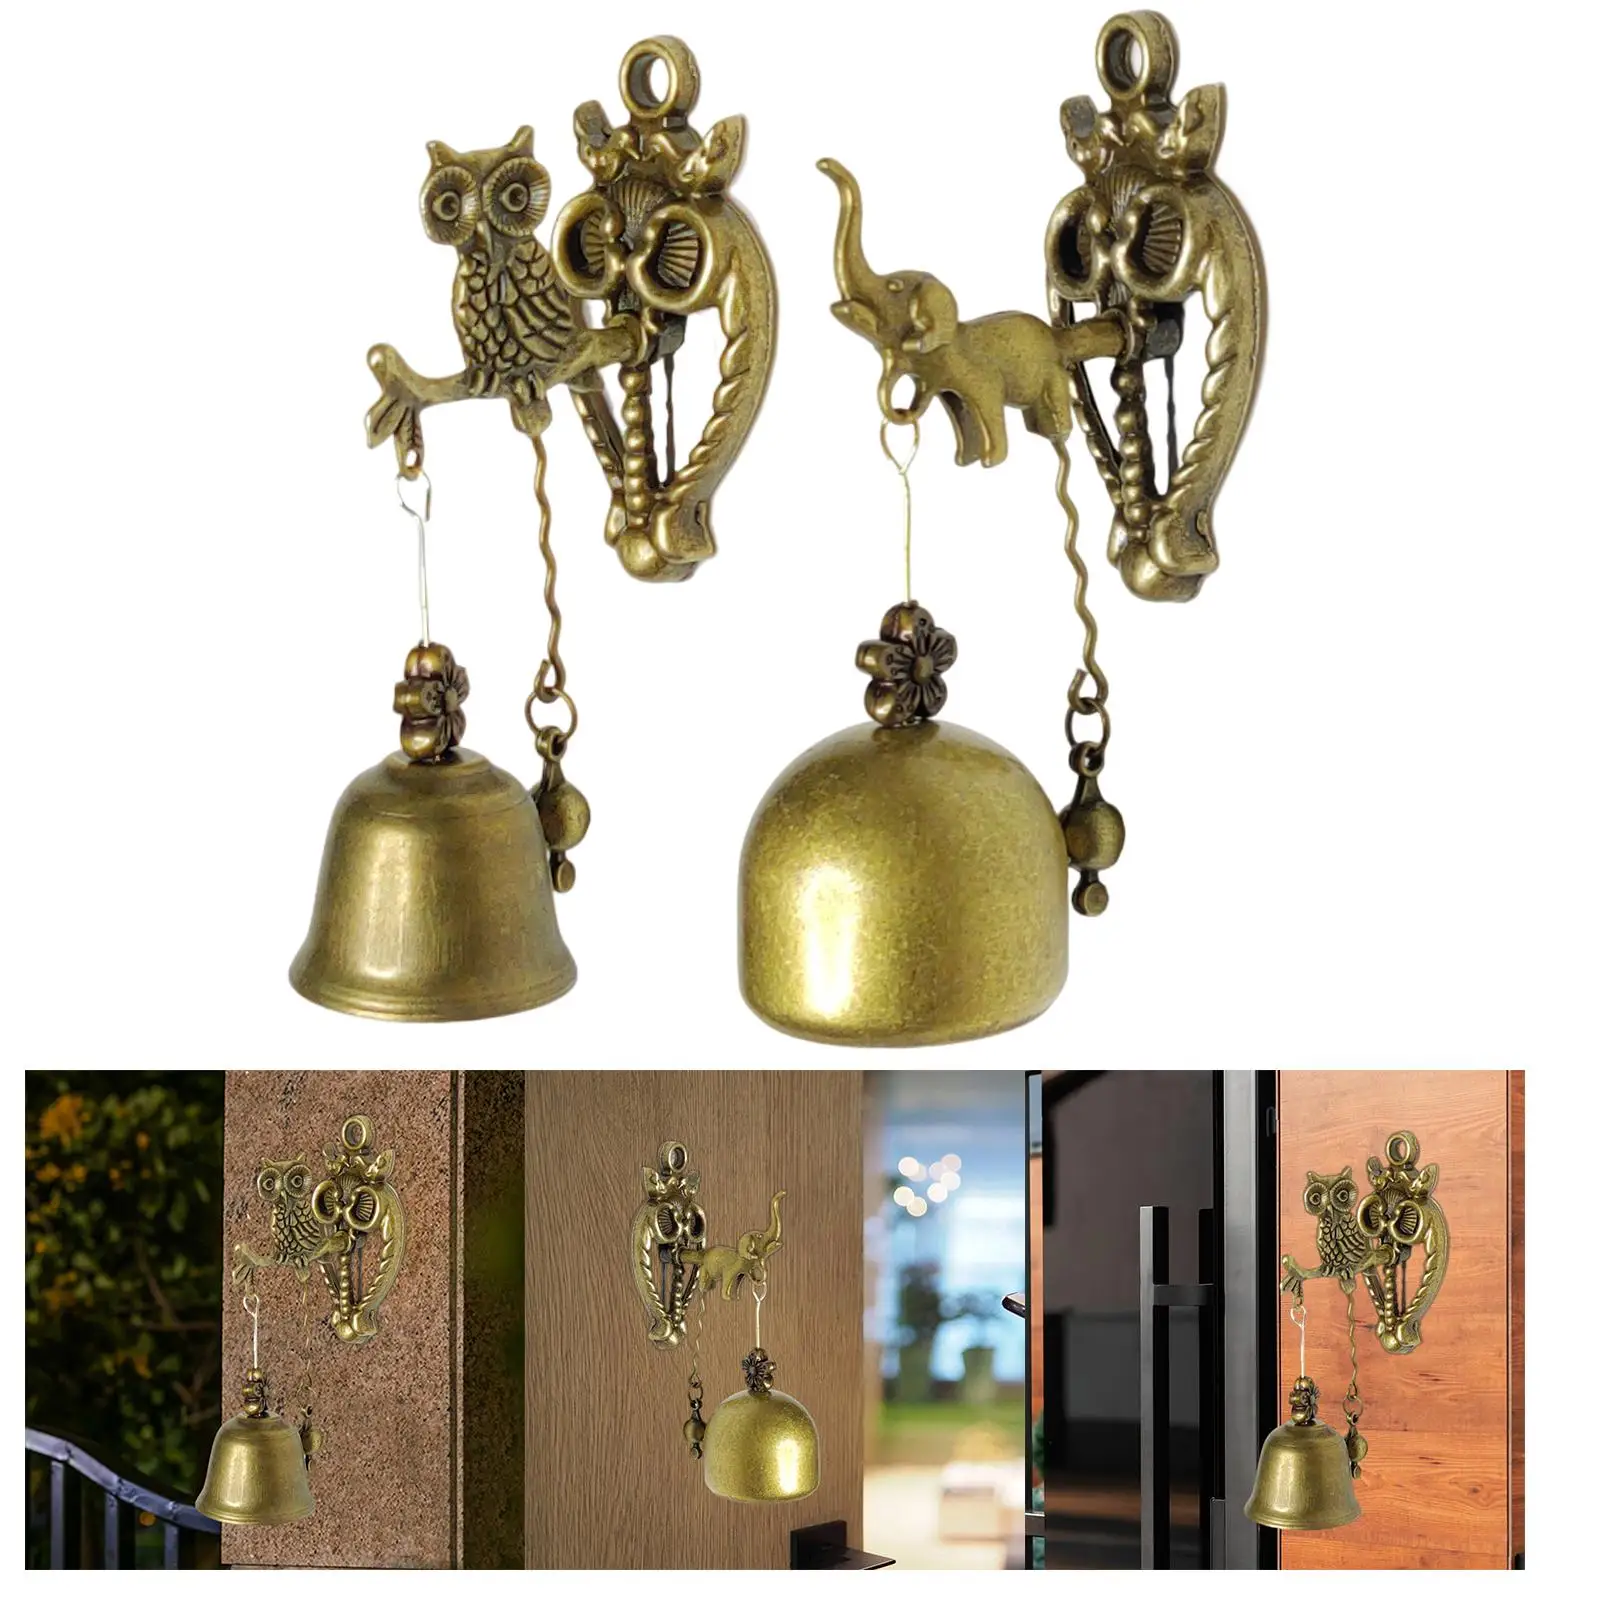 Antique Style Shopkeepers Door Bell Figure Classic Style Entry Door Chime for Cafe Farmhouse Anniversary Restaurant Villa